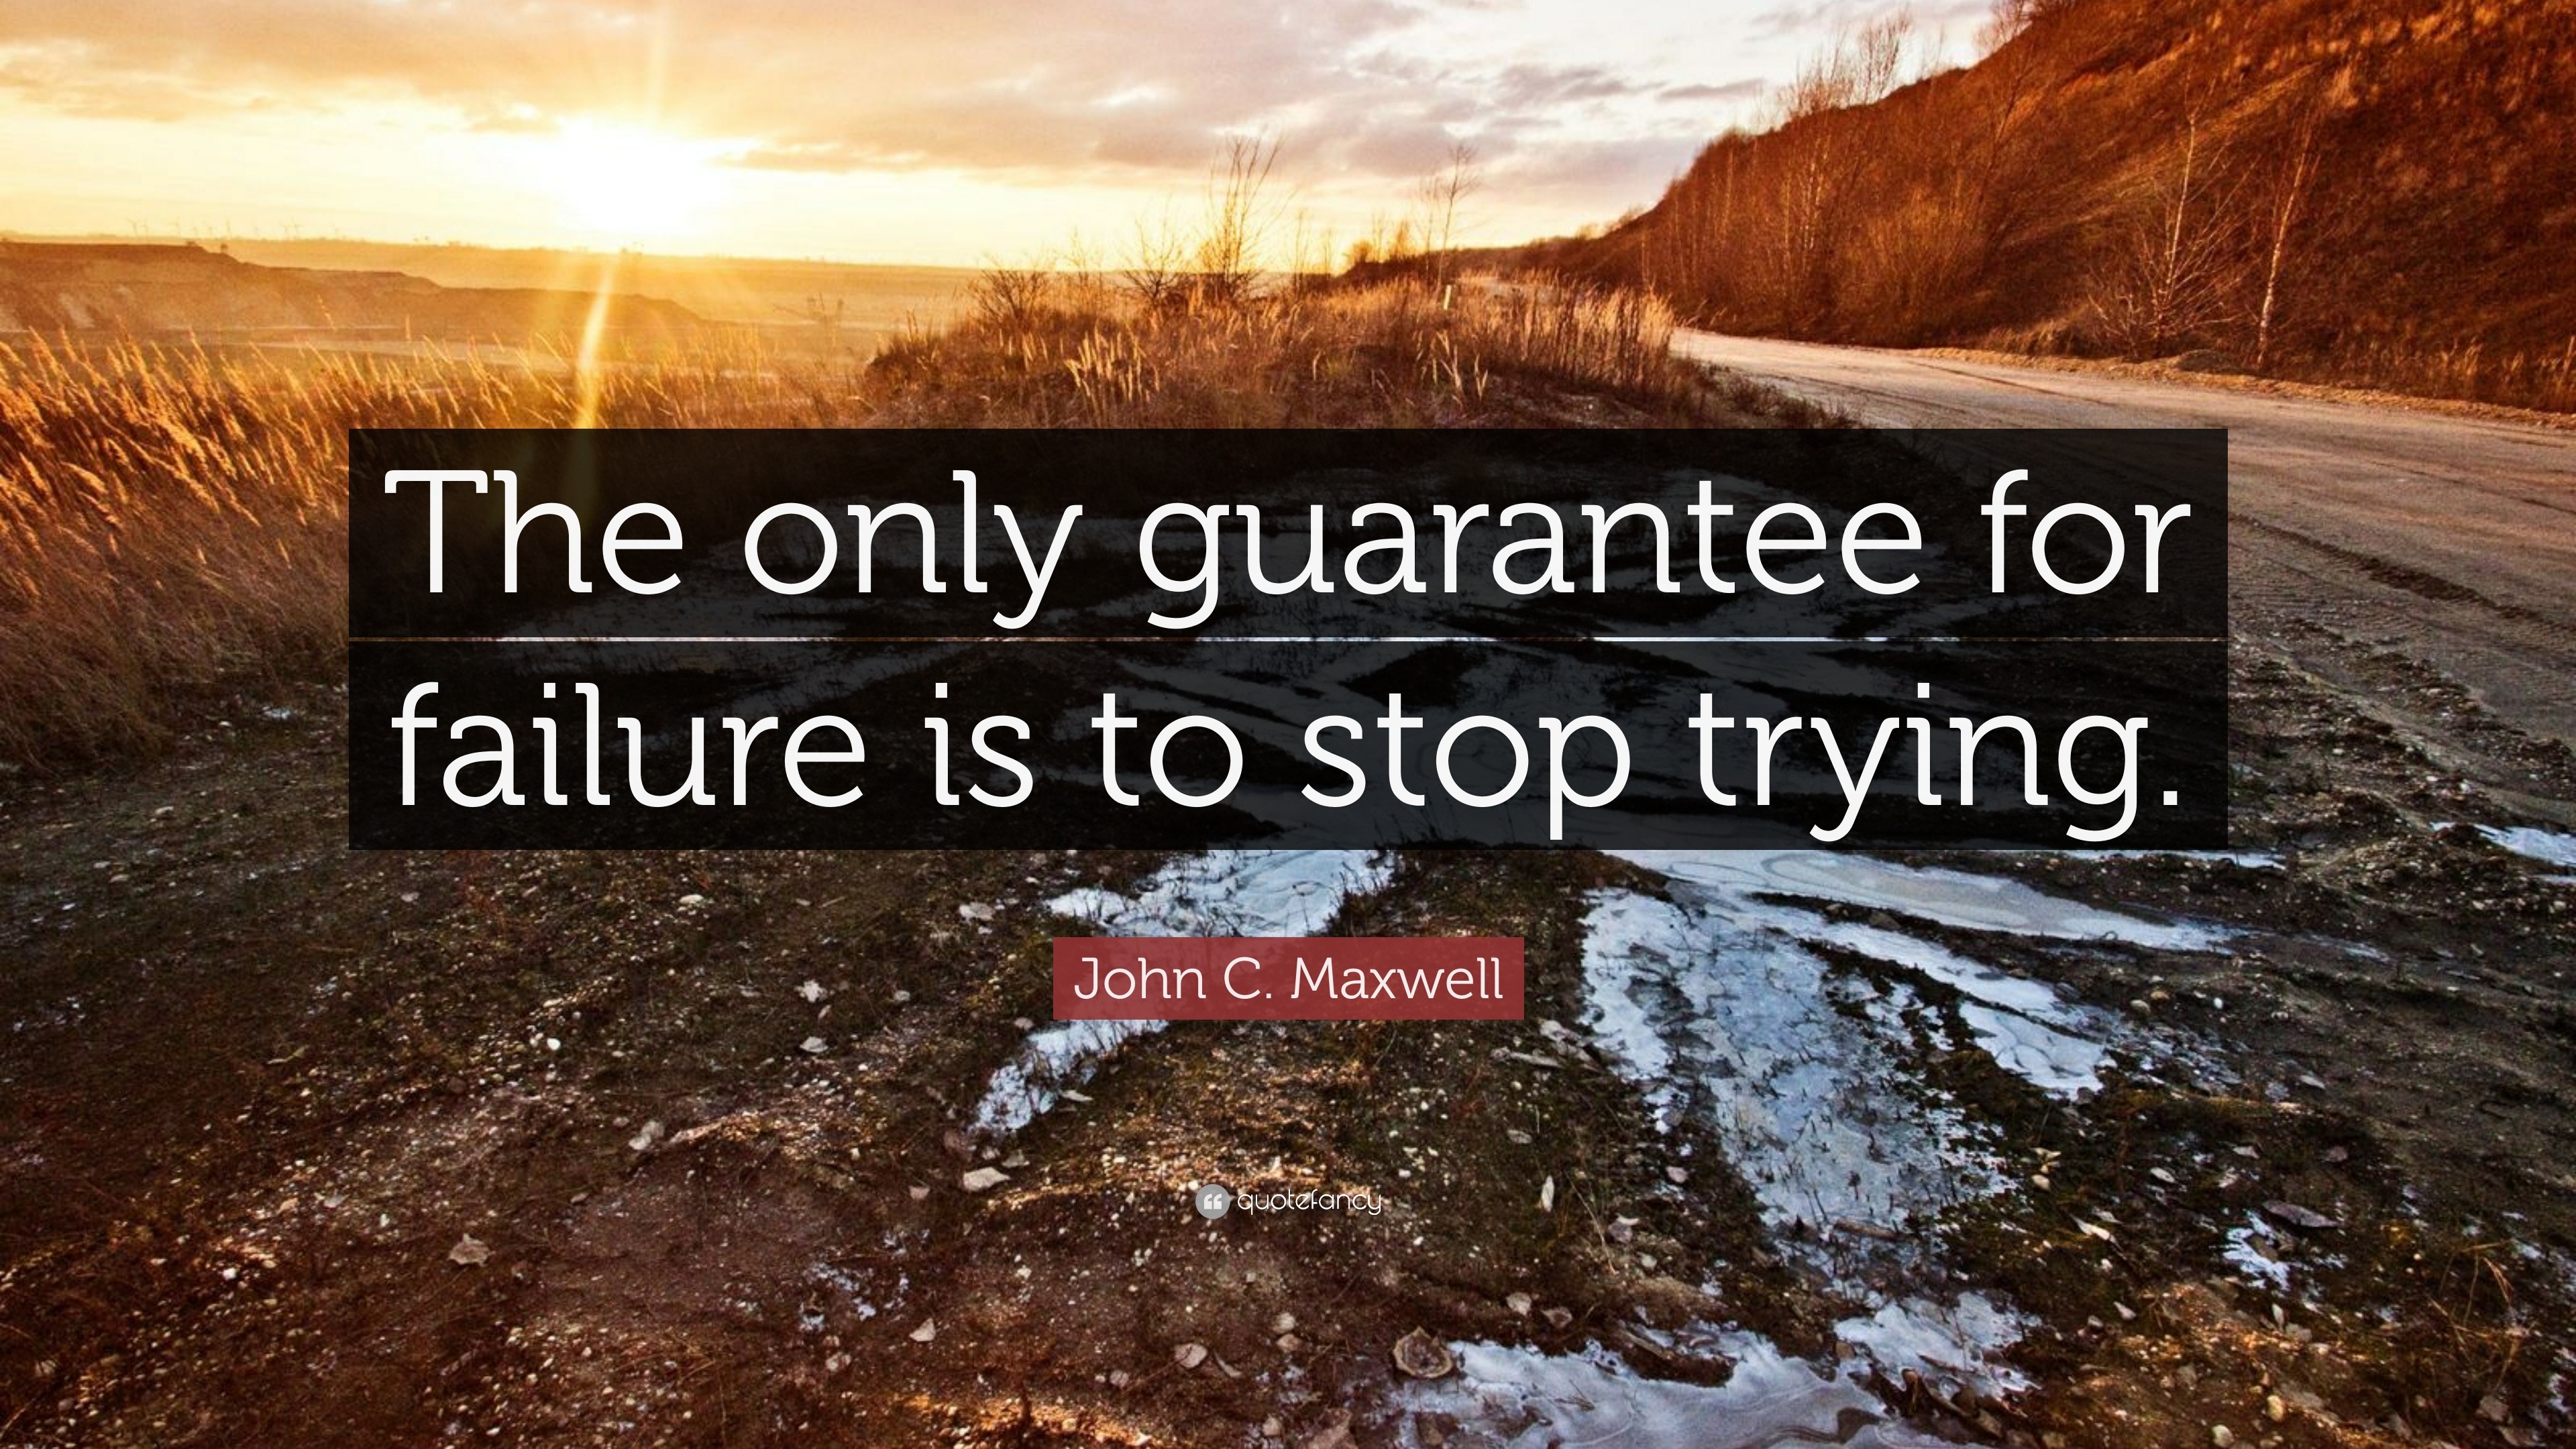 John C. Maxwell Quote: "The only guarantee for failure is ...